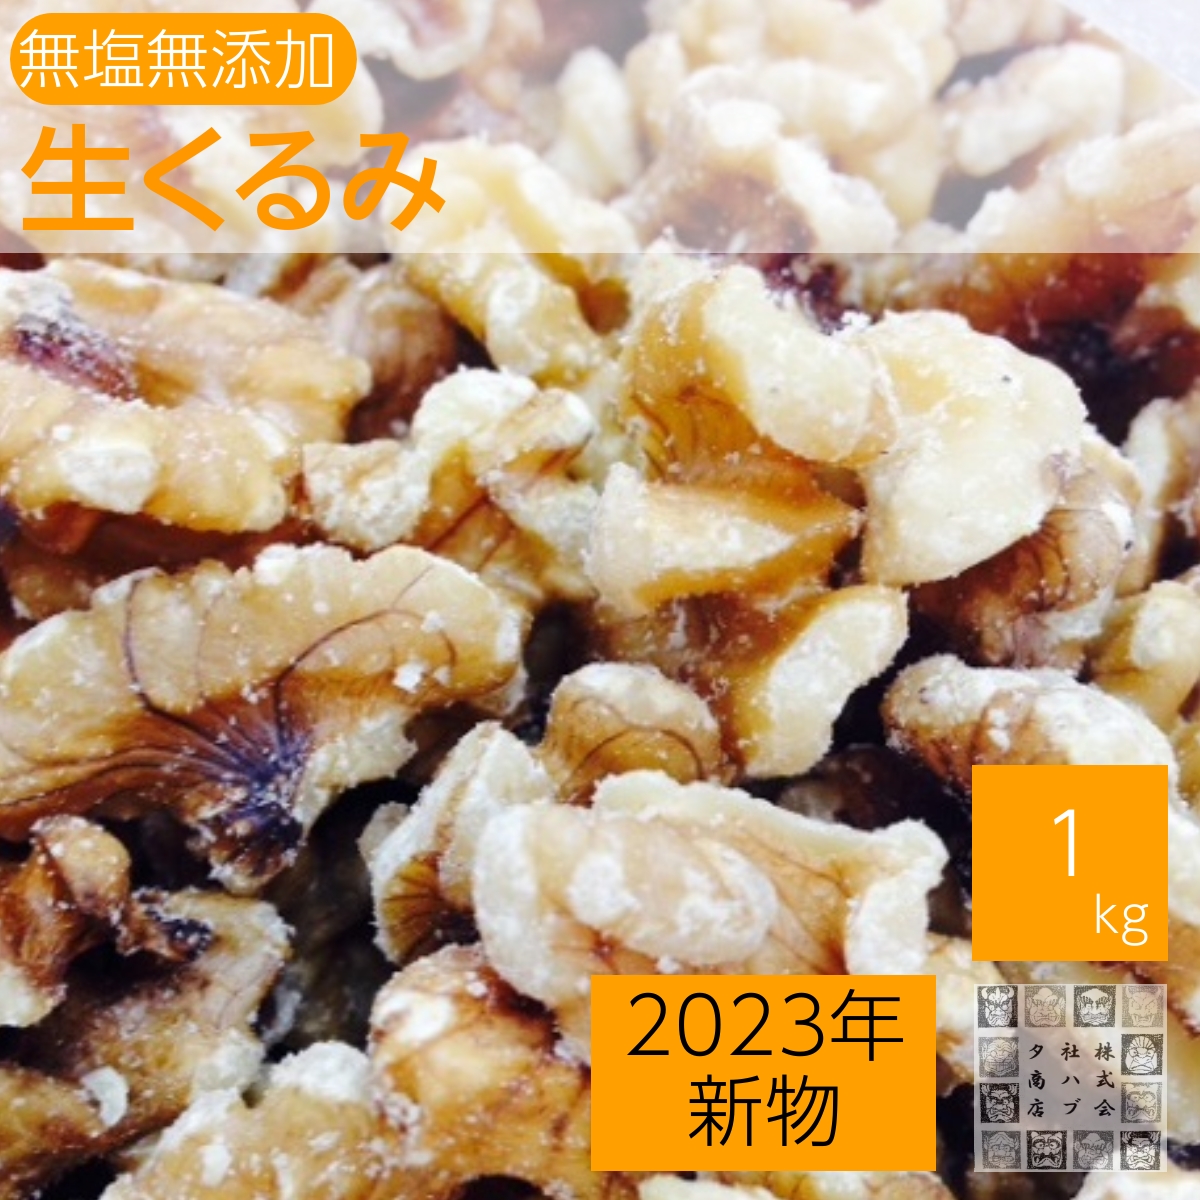  raw ...1kg walnut . peach salt free business use economical crack somewhat larger quantity sake. snack emergency rations nuts . peace 5 year new thing arrival 